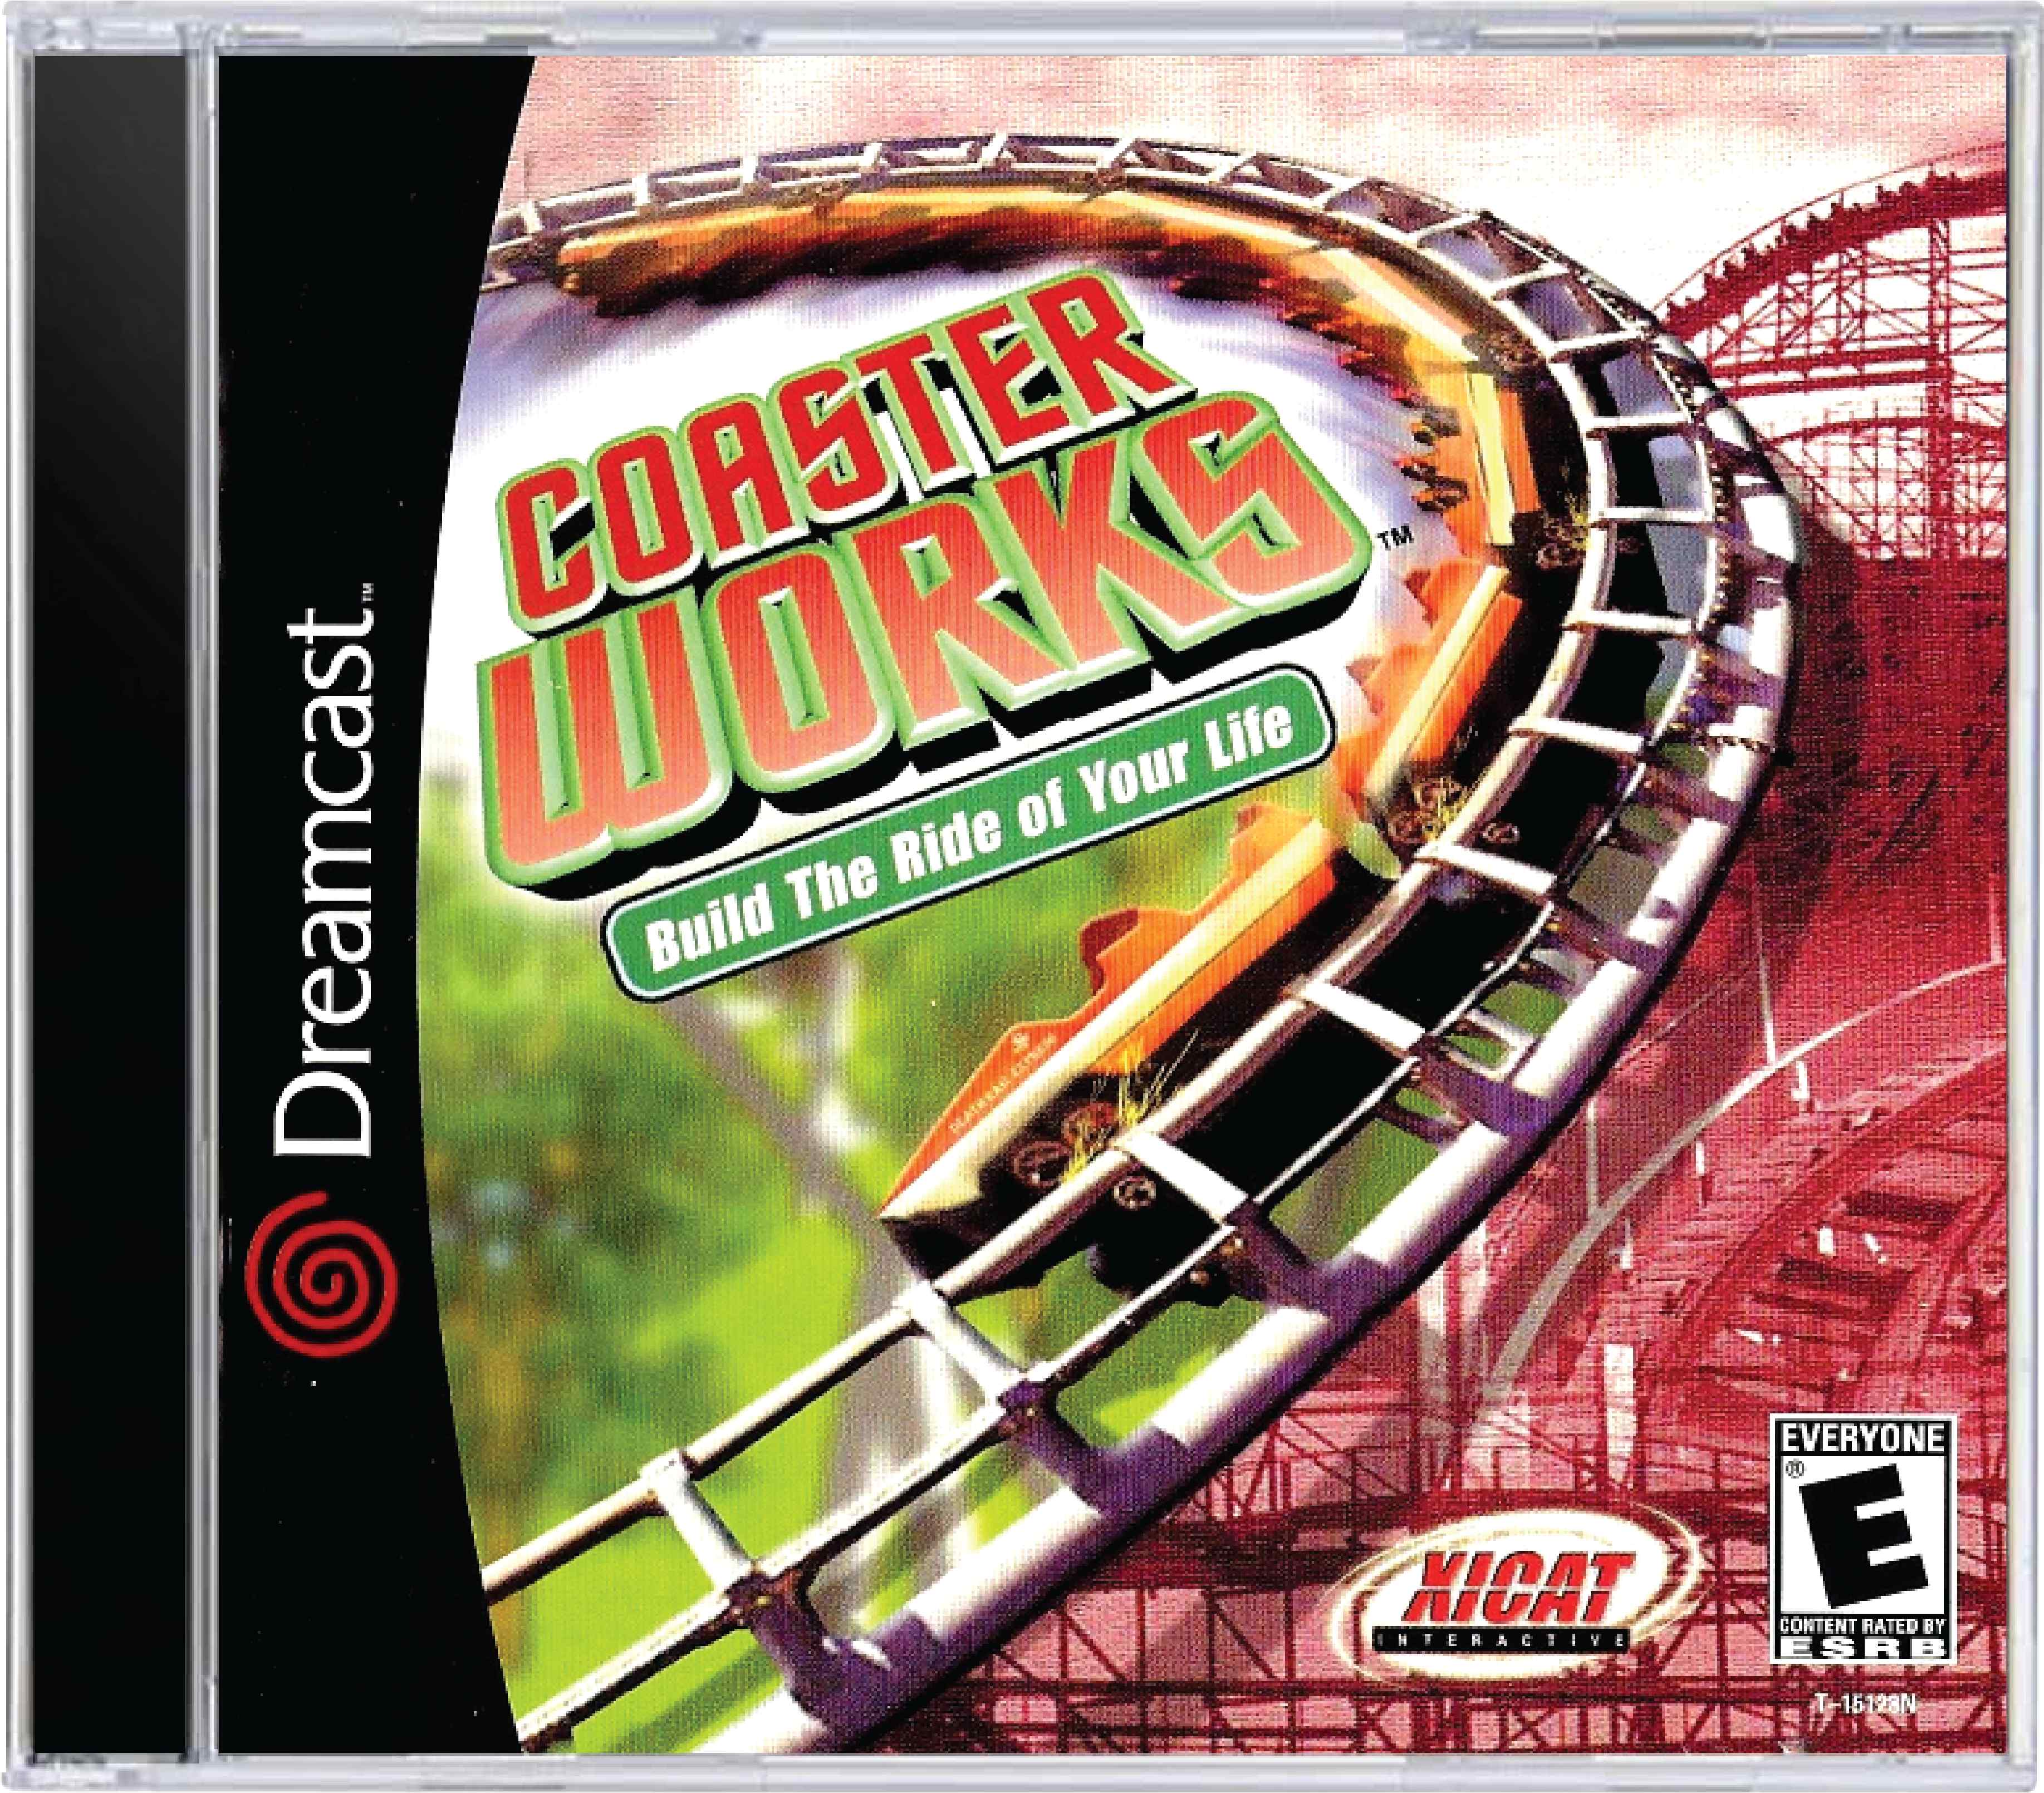 Coaster Works Cover Art